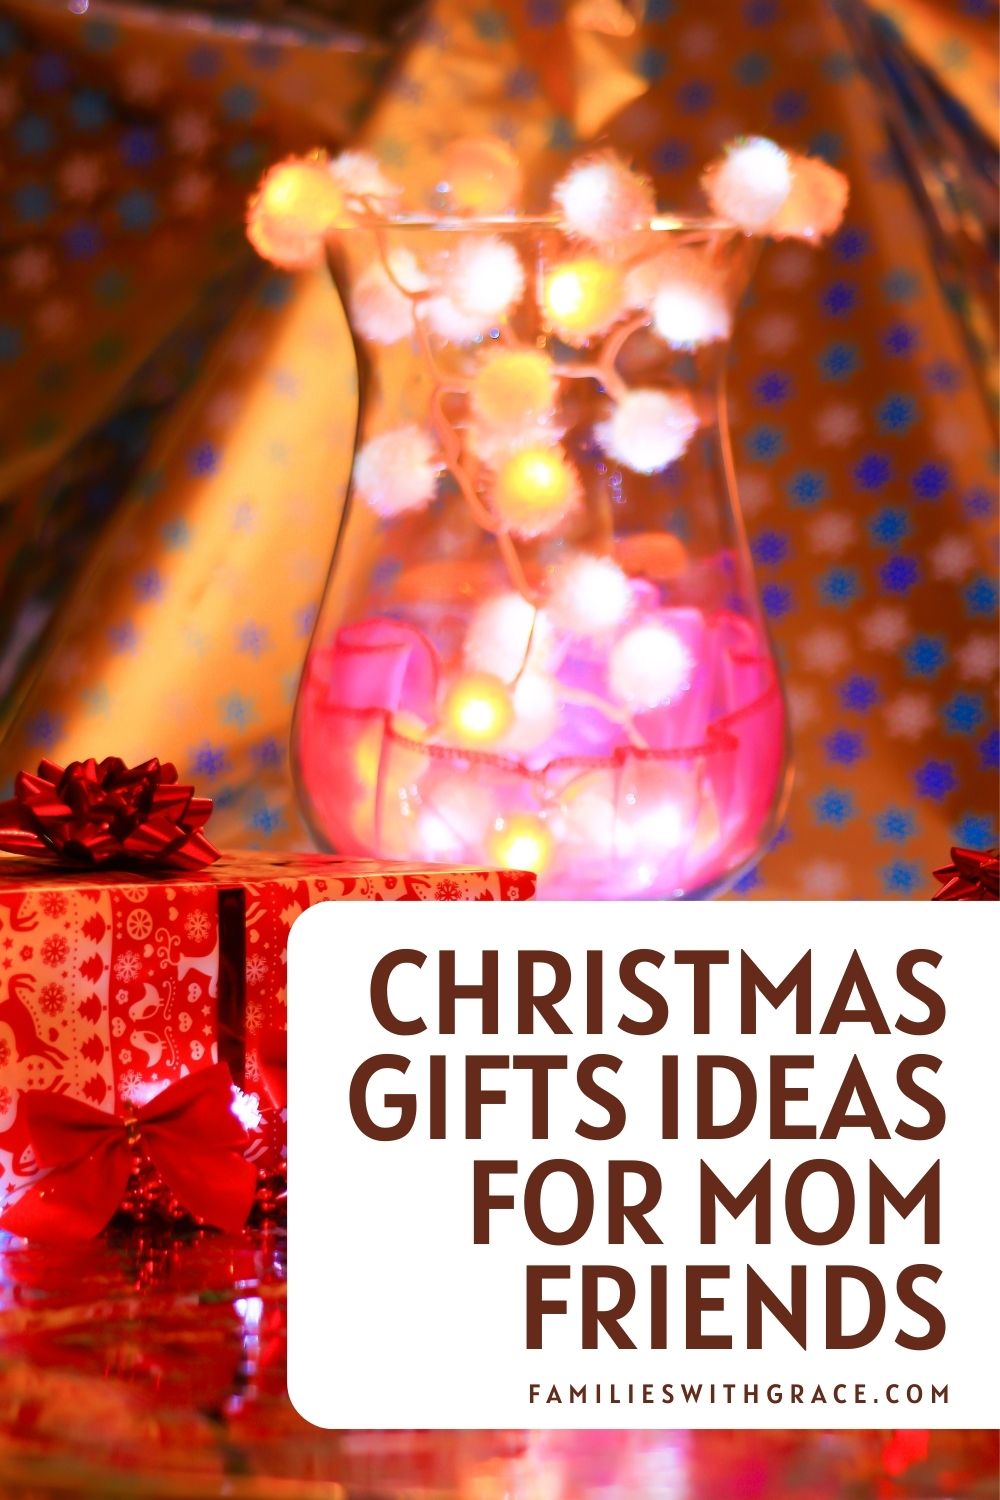 The Best Christmas Gift Ideas for Mum